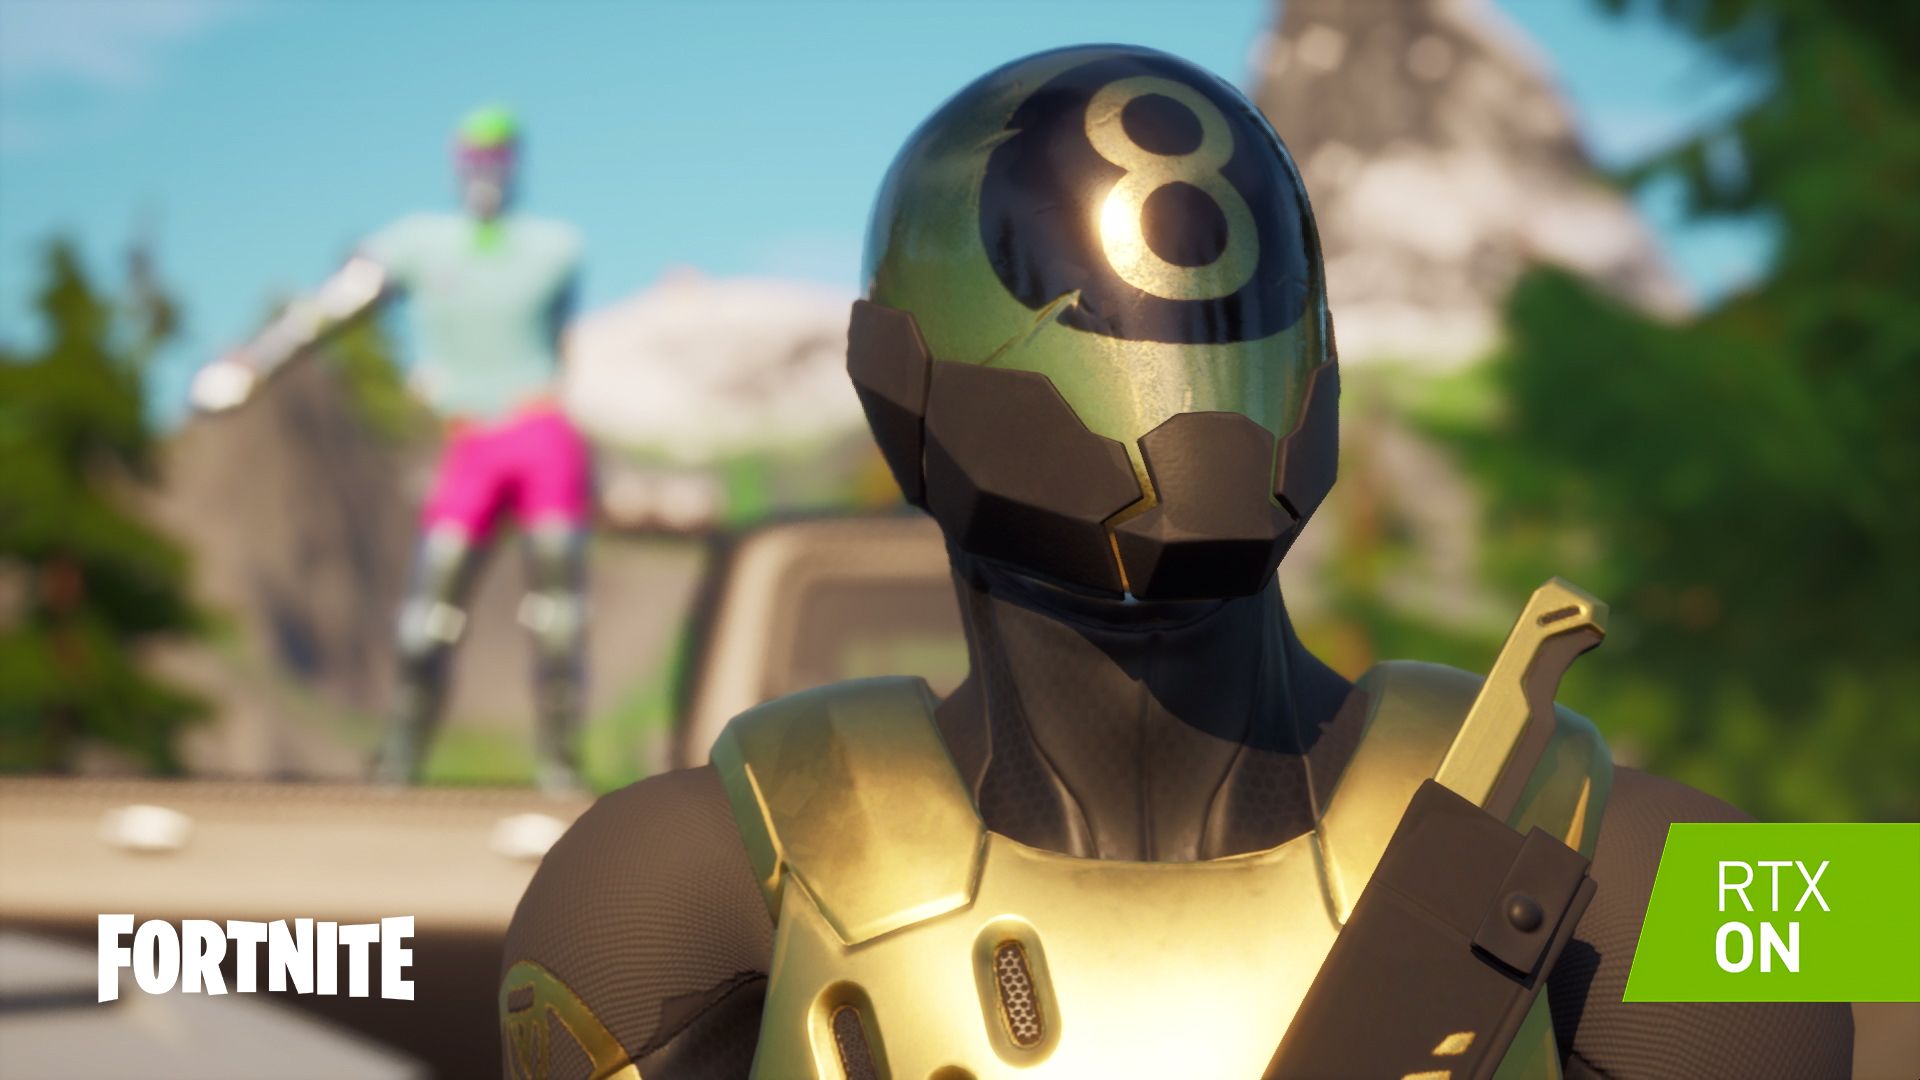 Fortnite' Is RTX On! Real Time Ray Tracing Comes To One Of Most Popular Games On The Planet